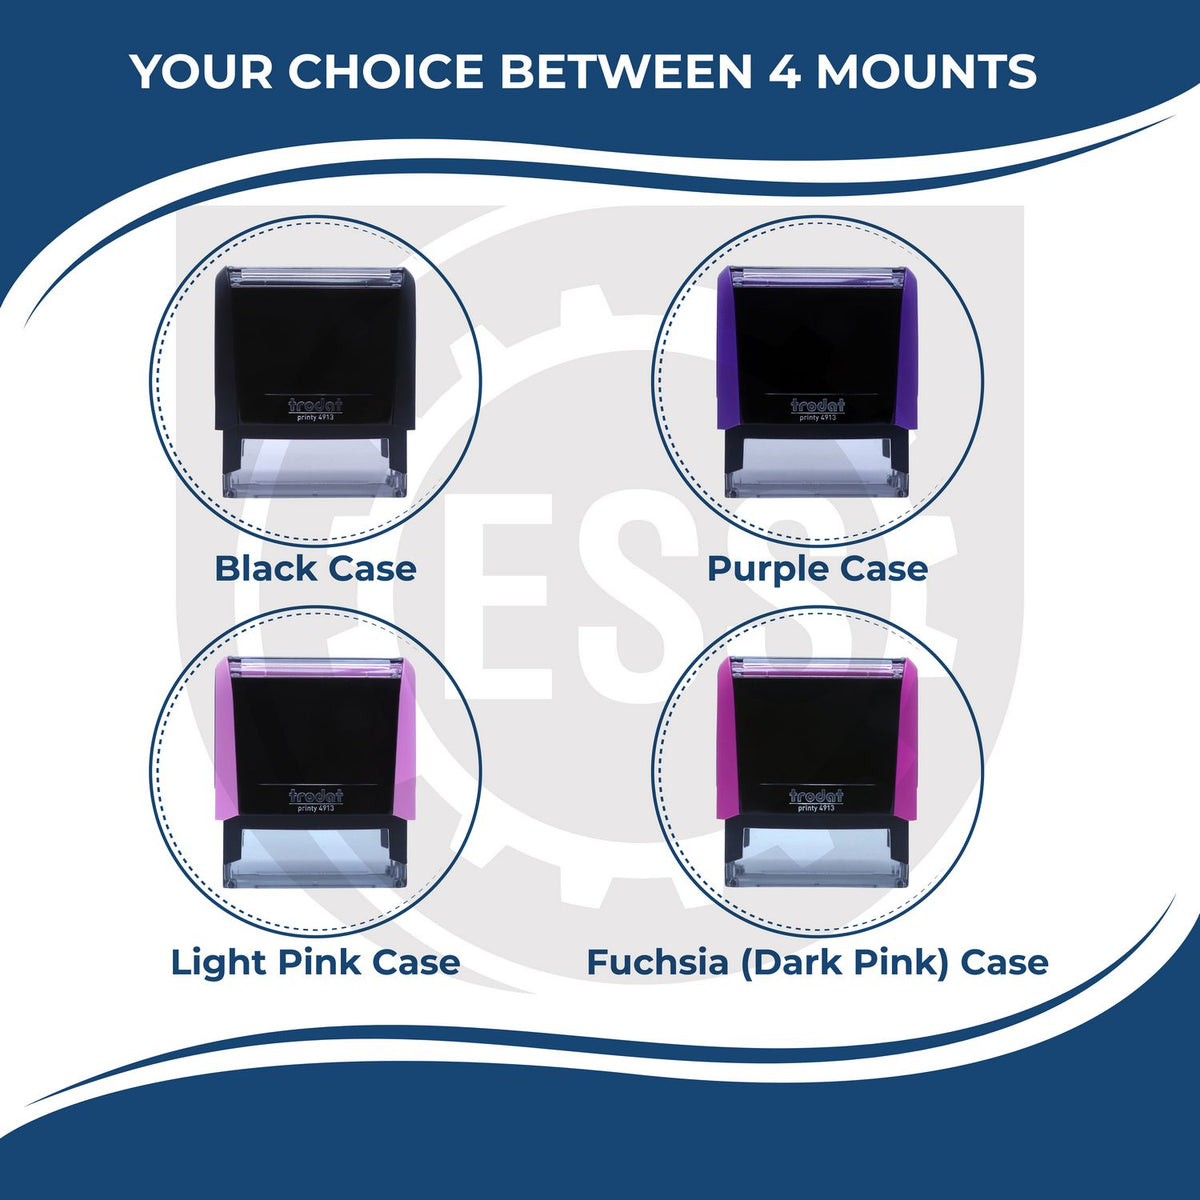 A picture of different colored mounts for the Self-Inking State Seal Nebraska Notary Stamp featurning a Red, Blue or Black Mount